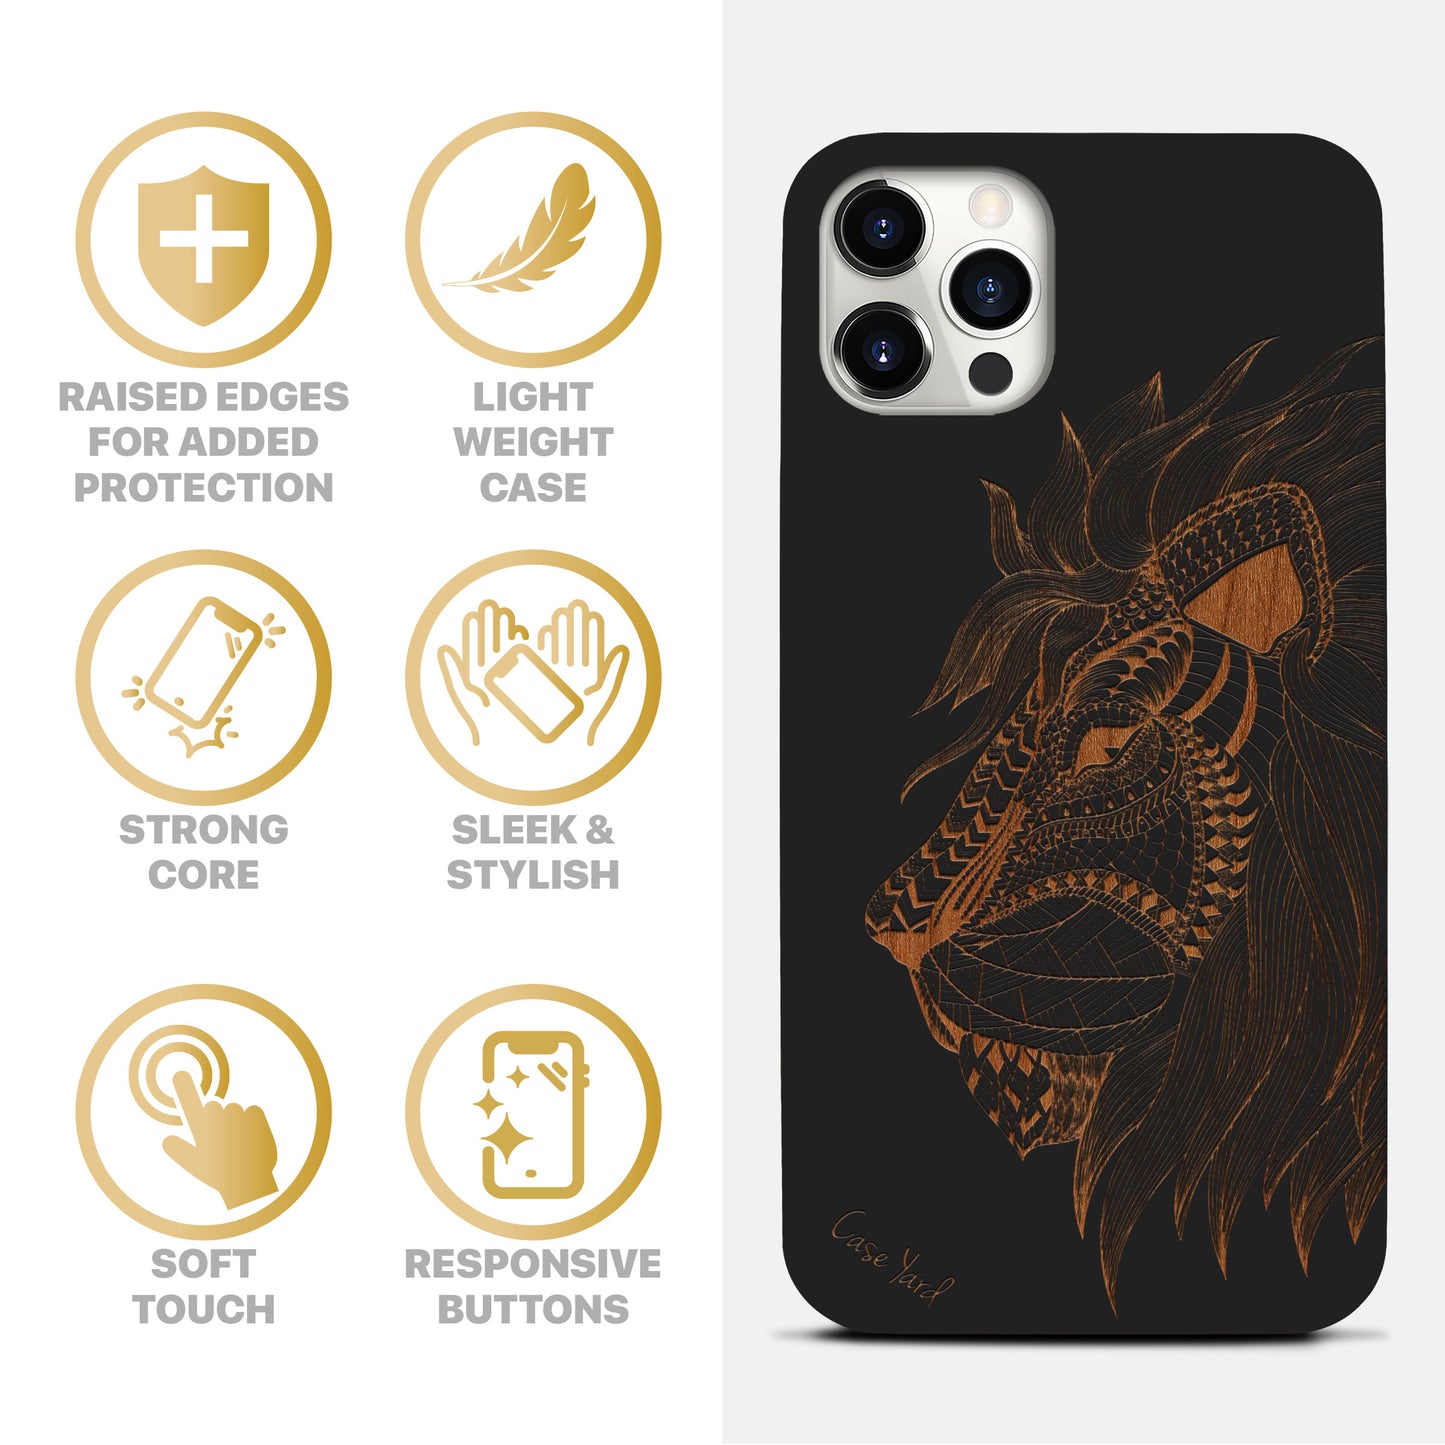 Wooden Cell Phone Case Cover, Laser Engraved case for iPhone & Samsung phone Doodle Lion Face Design